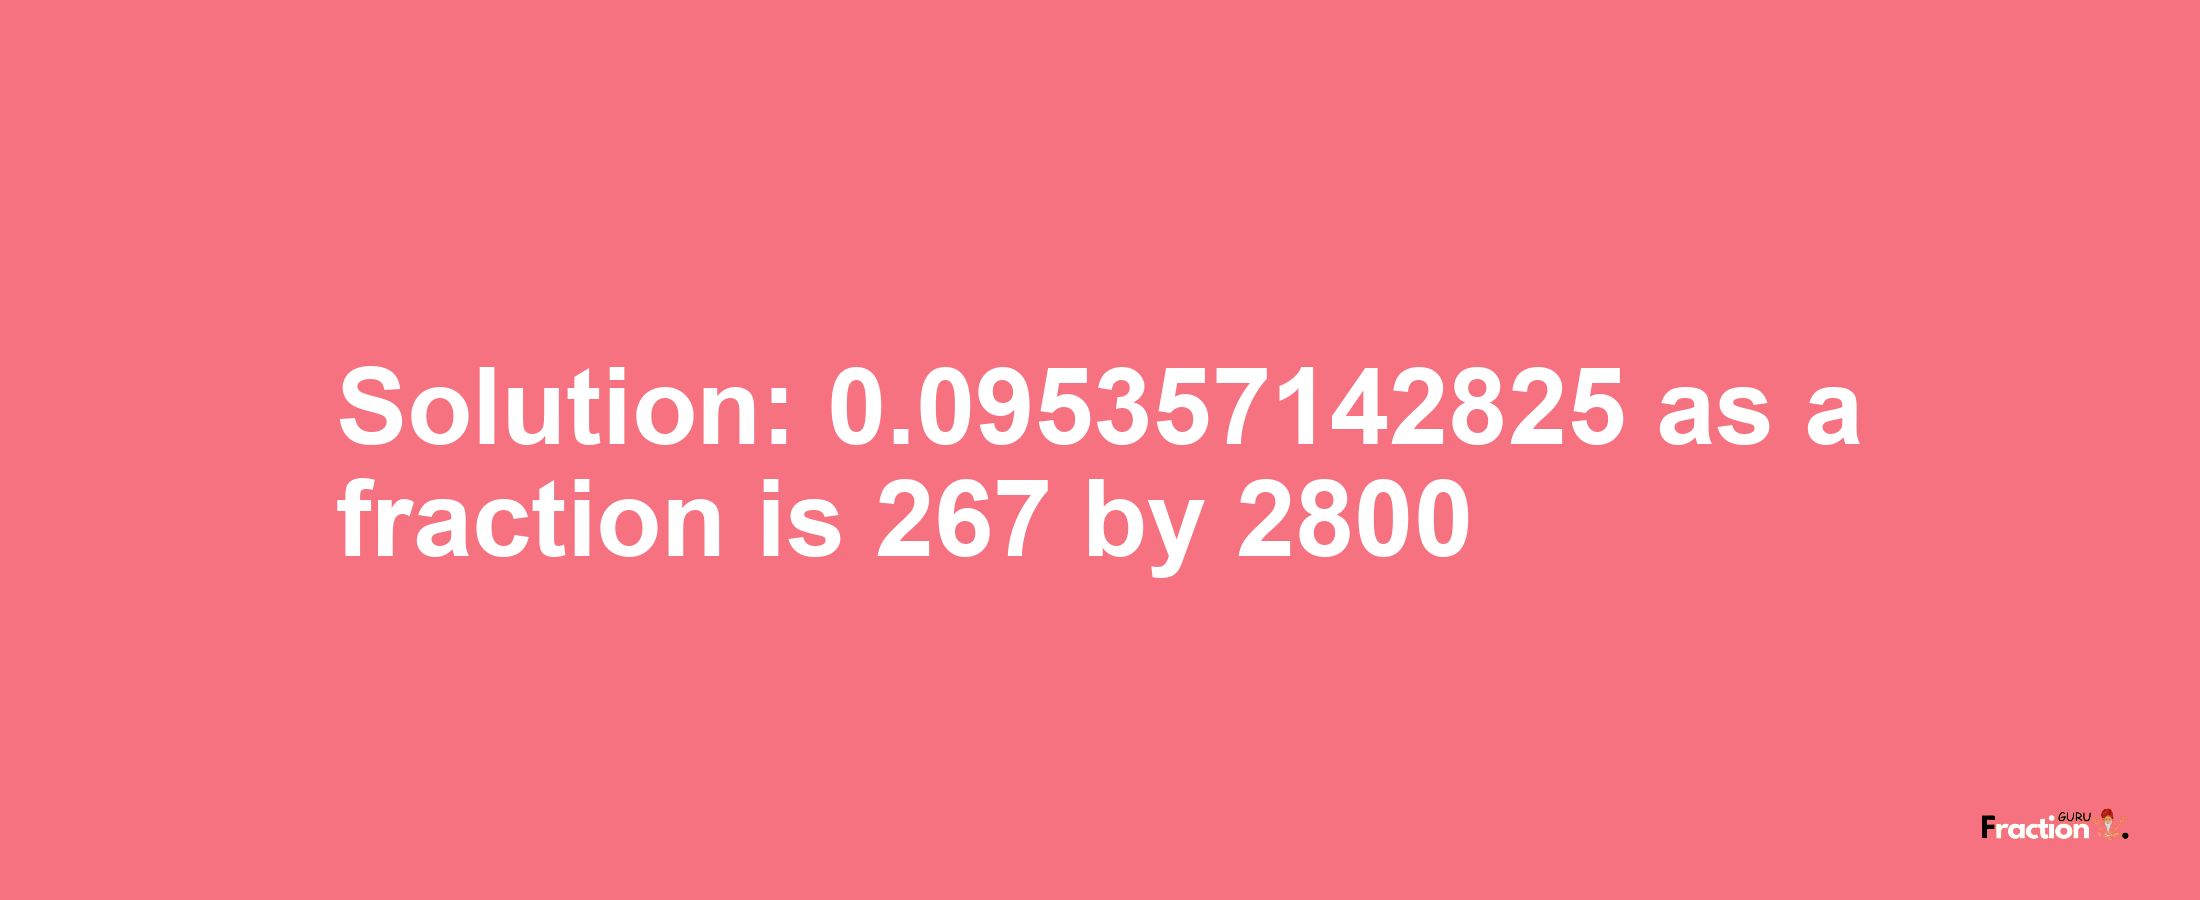 Solution:0.095357142825 as a fraction is 267/2800